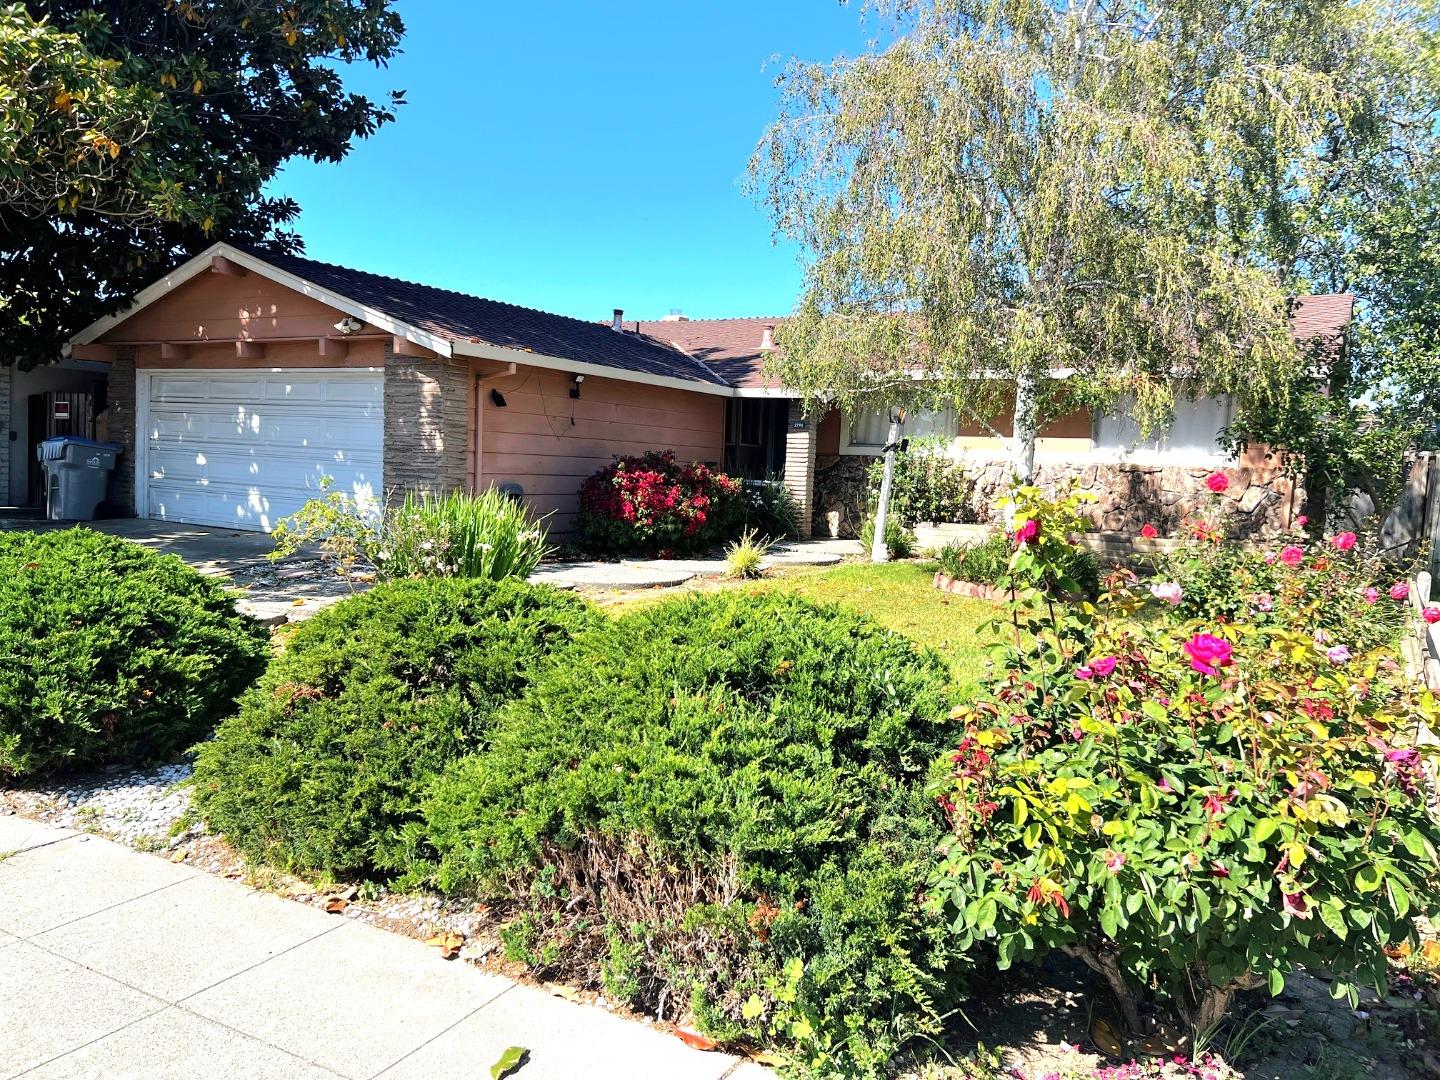 Photo of 2794 Eulalie Dr in San Jose, CA